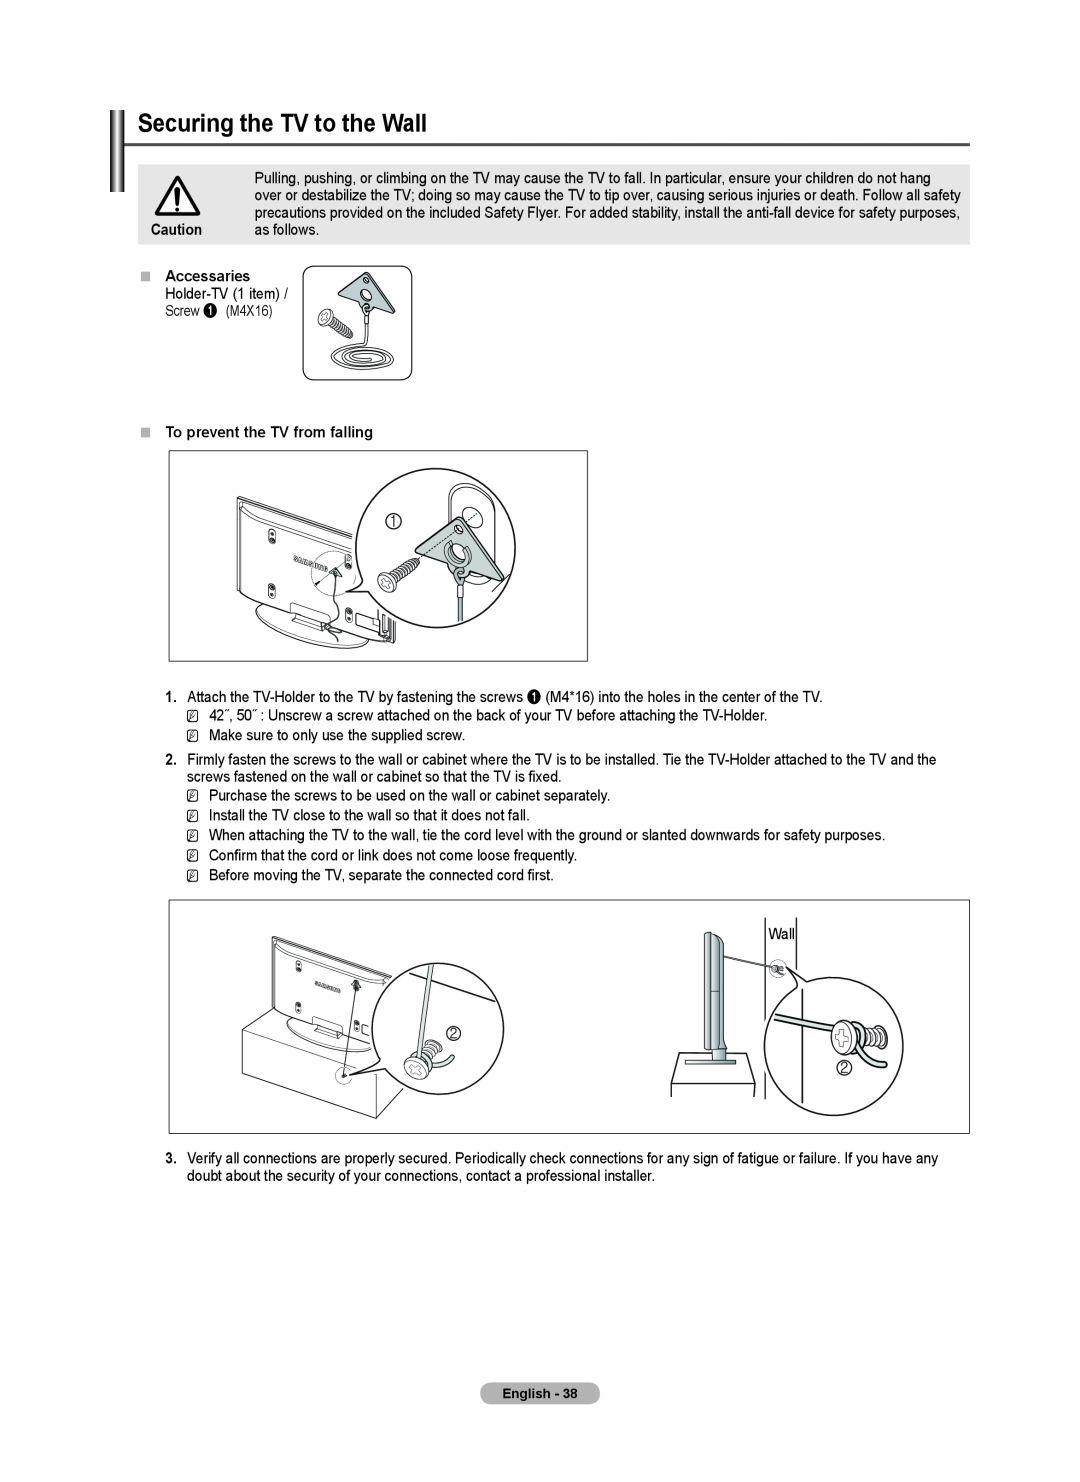 Samsung BN68-02426A-00 user manual Securing the TV to the Wall, „„ Accessaries, „„ To prevent the TV from falling 